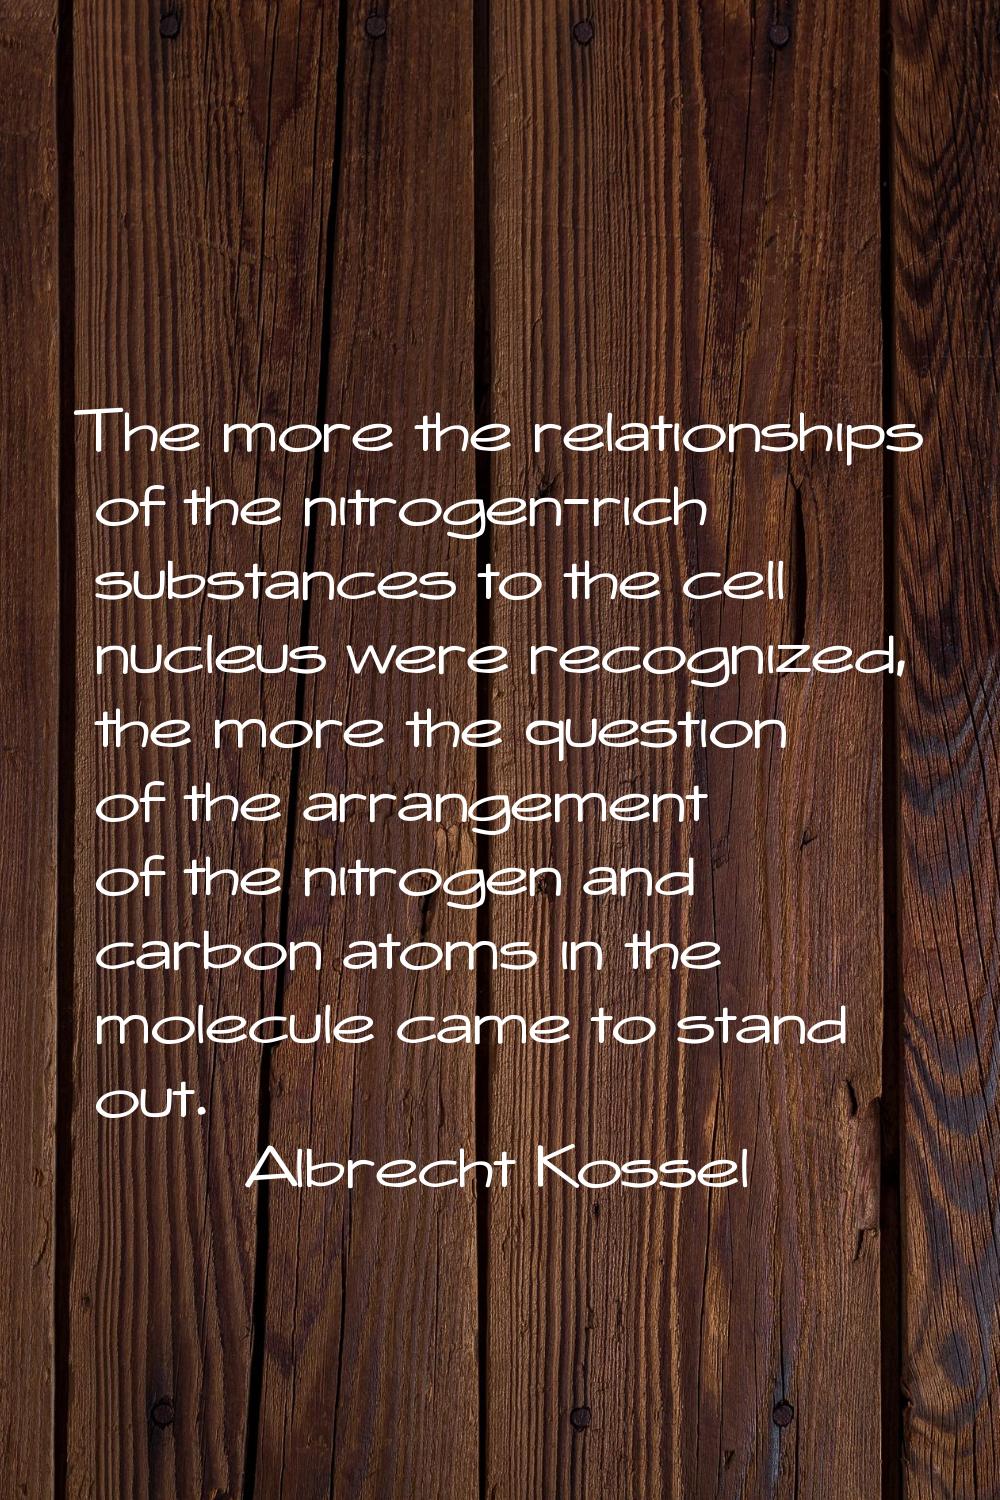 The more the relationships of the nitrogen-rich substances to the cell nucleus were recognized, the